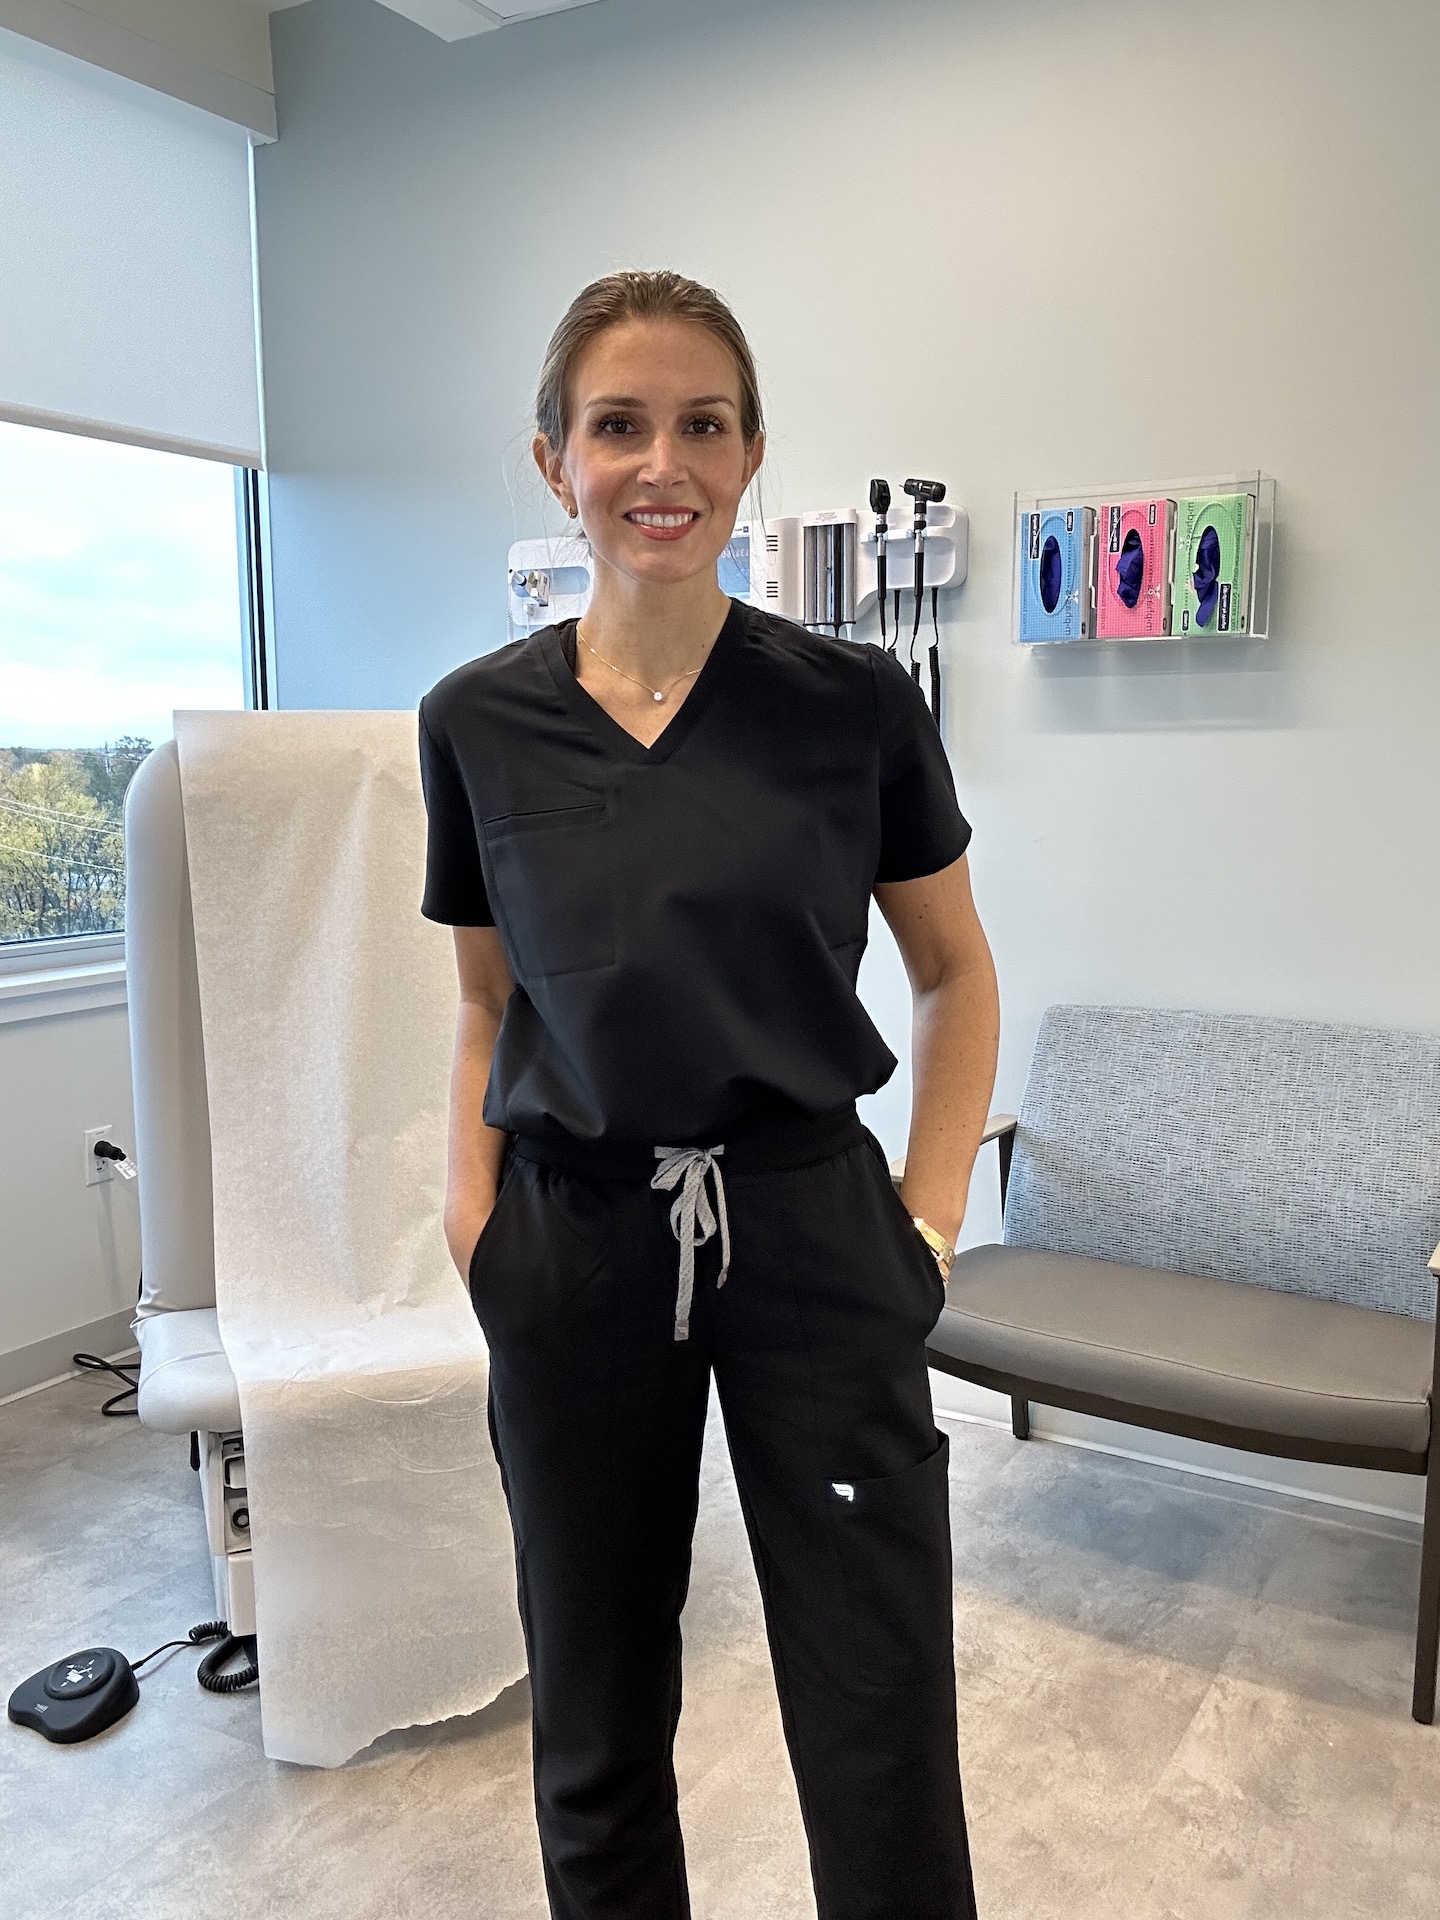 Fabletics Launches First-Ever Scrubs Collection – Made with